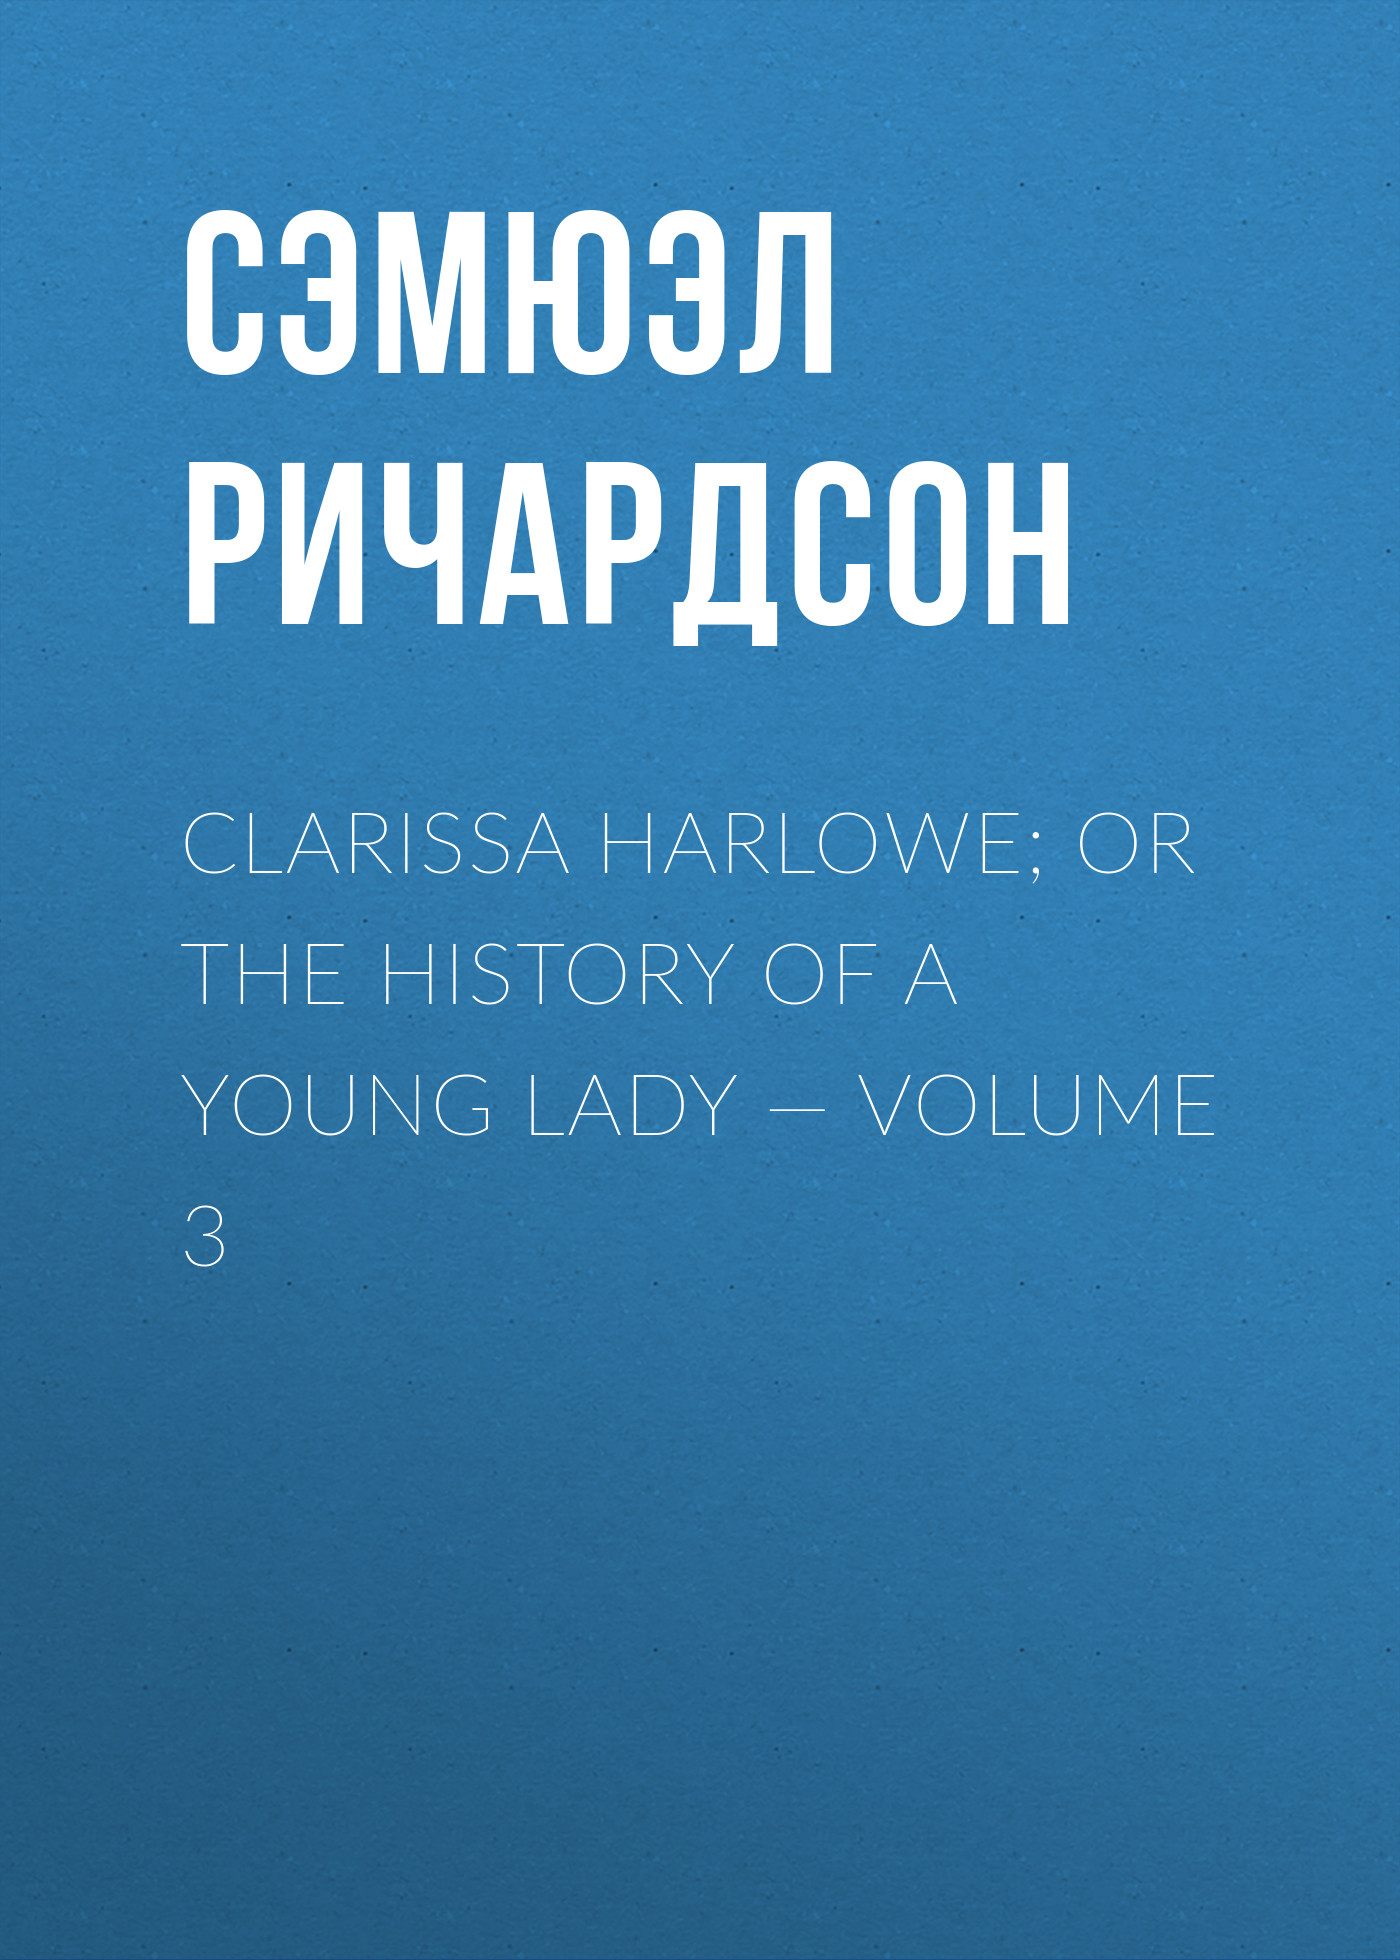 Clarissa Harlowe; or the history of a young lady— Volume 3